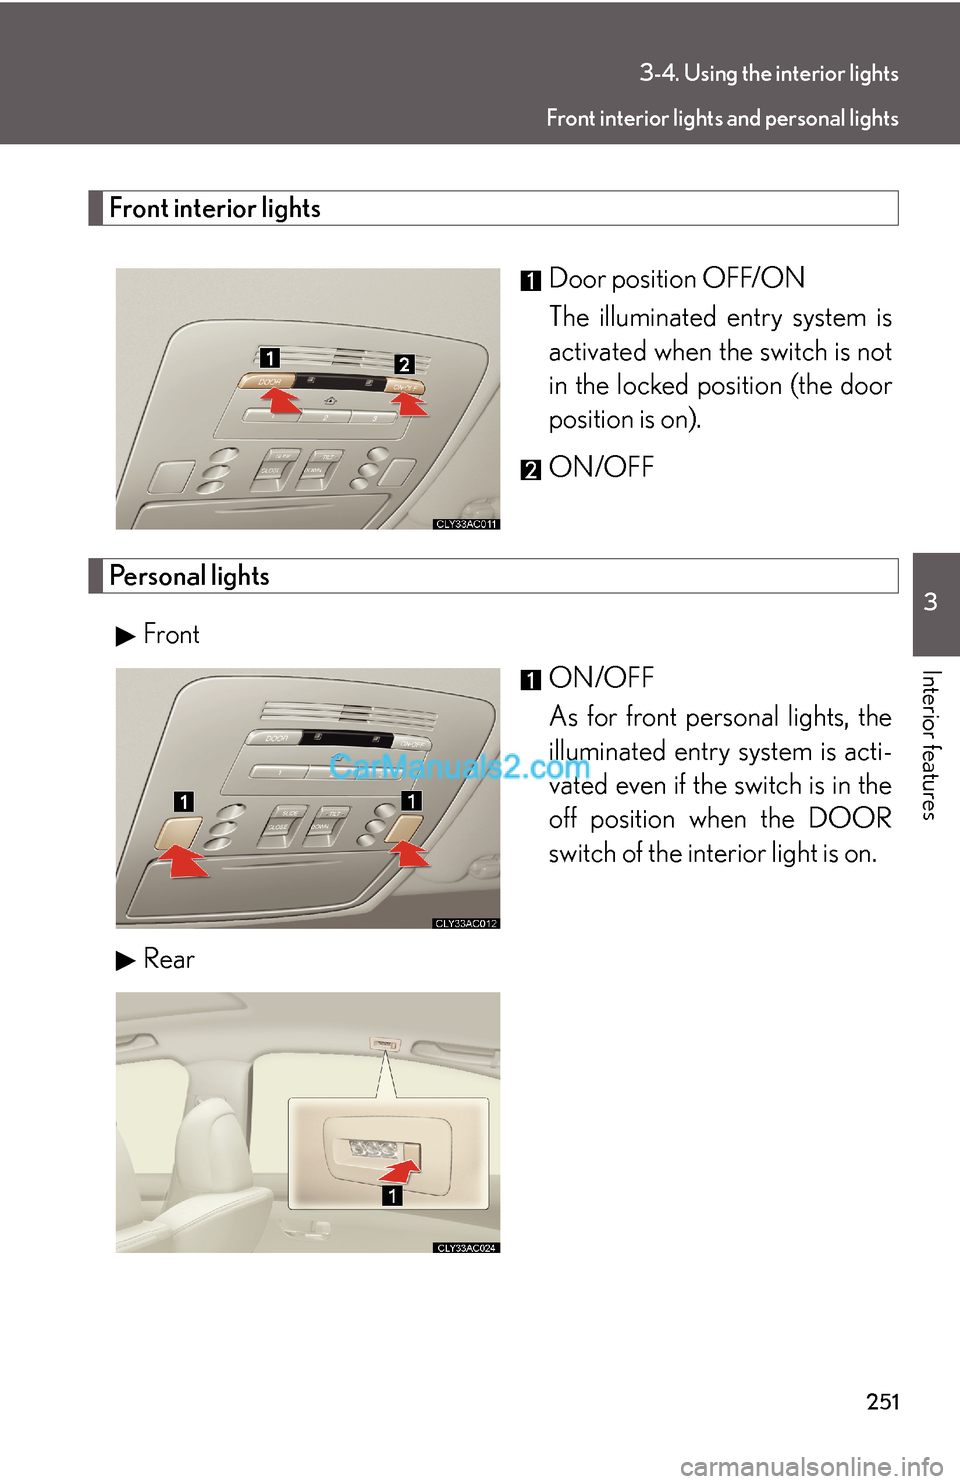 Lexus ES350 2008  Using the interior lights 251
3-4. Using the interior lights
3
Interior features
Front interior lights
Door position OFF/ON
The illuminated entry system is
activated when the switch is not
in the locked position (the door
posi